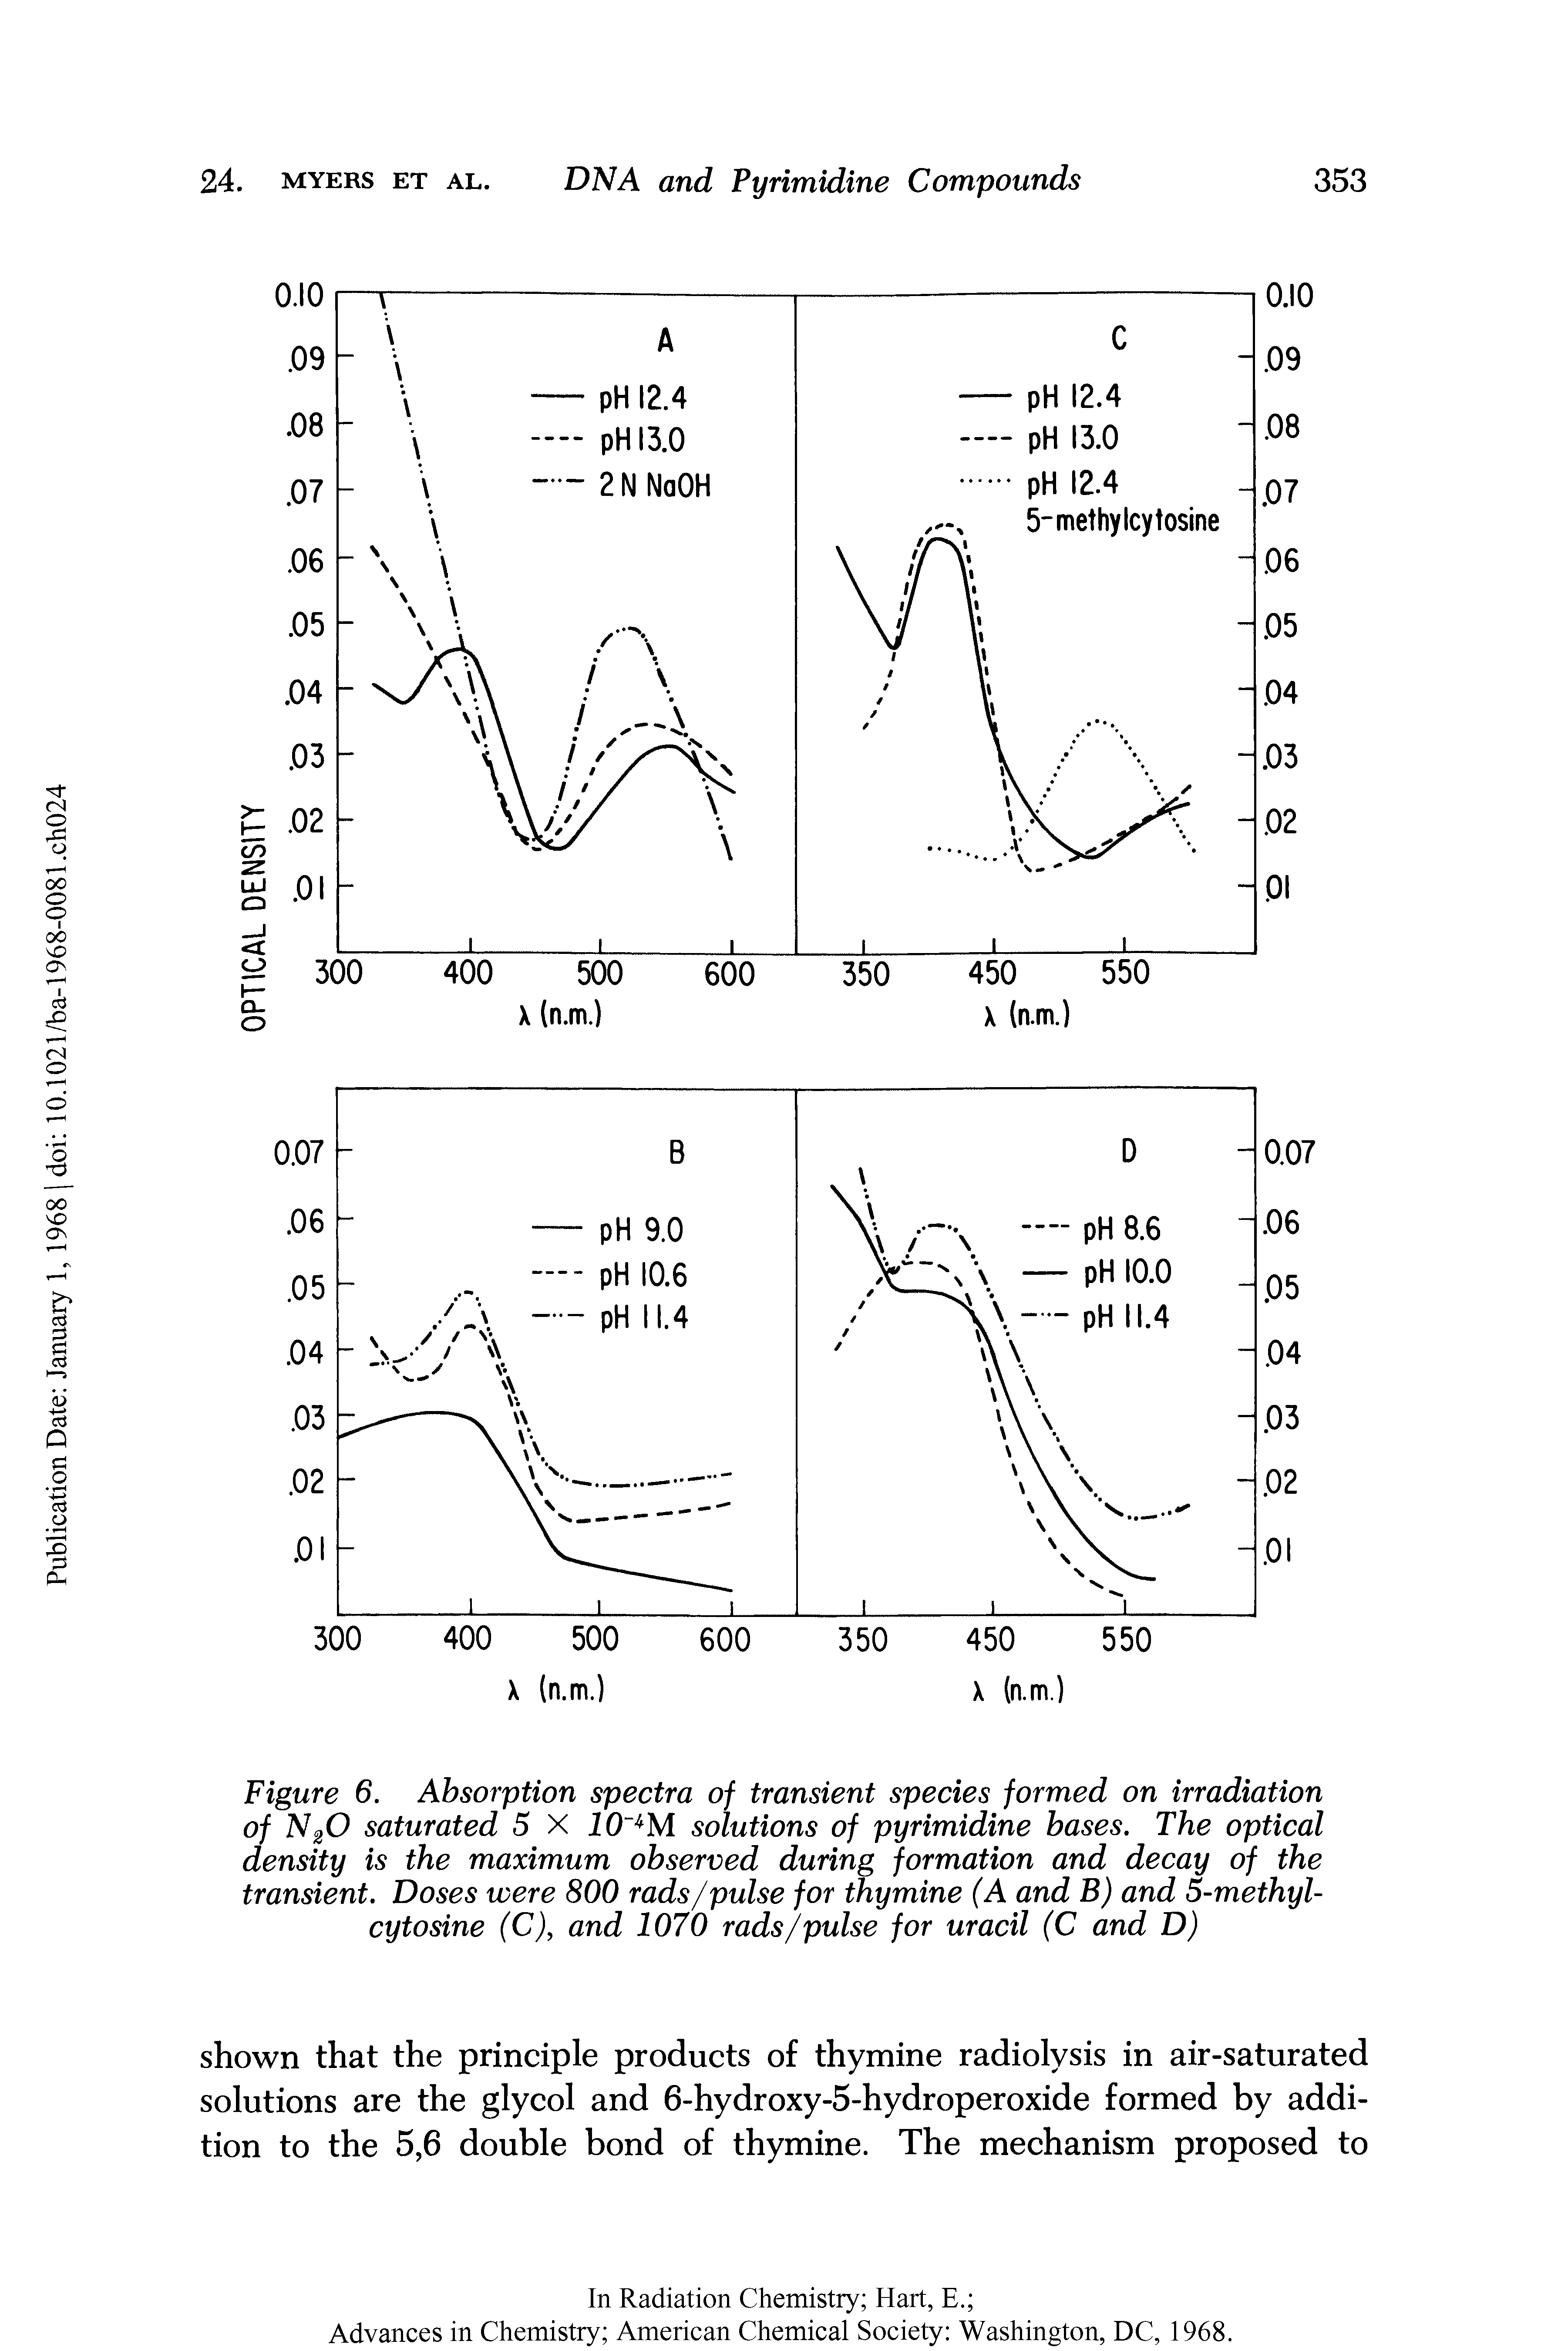 Figure 6. Absorption spectra of transient species formed on irradiation of N20 saturated 5 X 10 M solutions of pyrimidine bases. The optical density is the maximum observed during formation and decay of the transient. Doses were 800 rads/pulse for thymine (A and B) and 5-methyl-cytosine (C), and 1070 rads/pulse for uracil (C and D)...